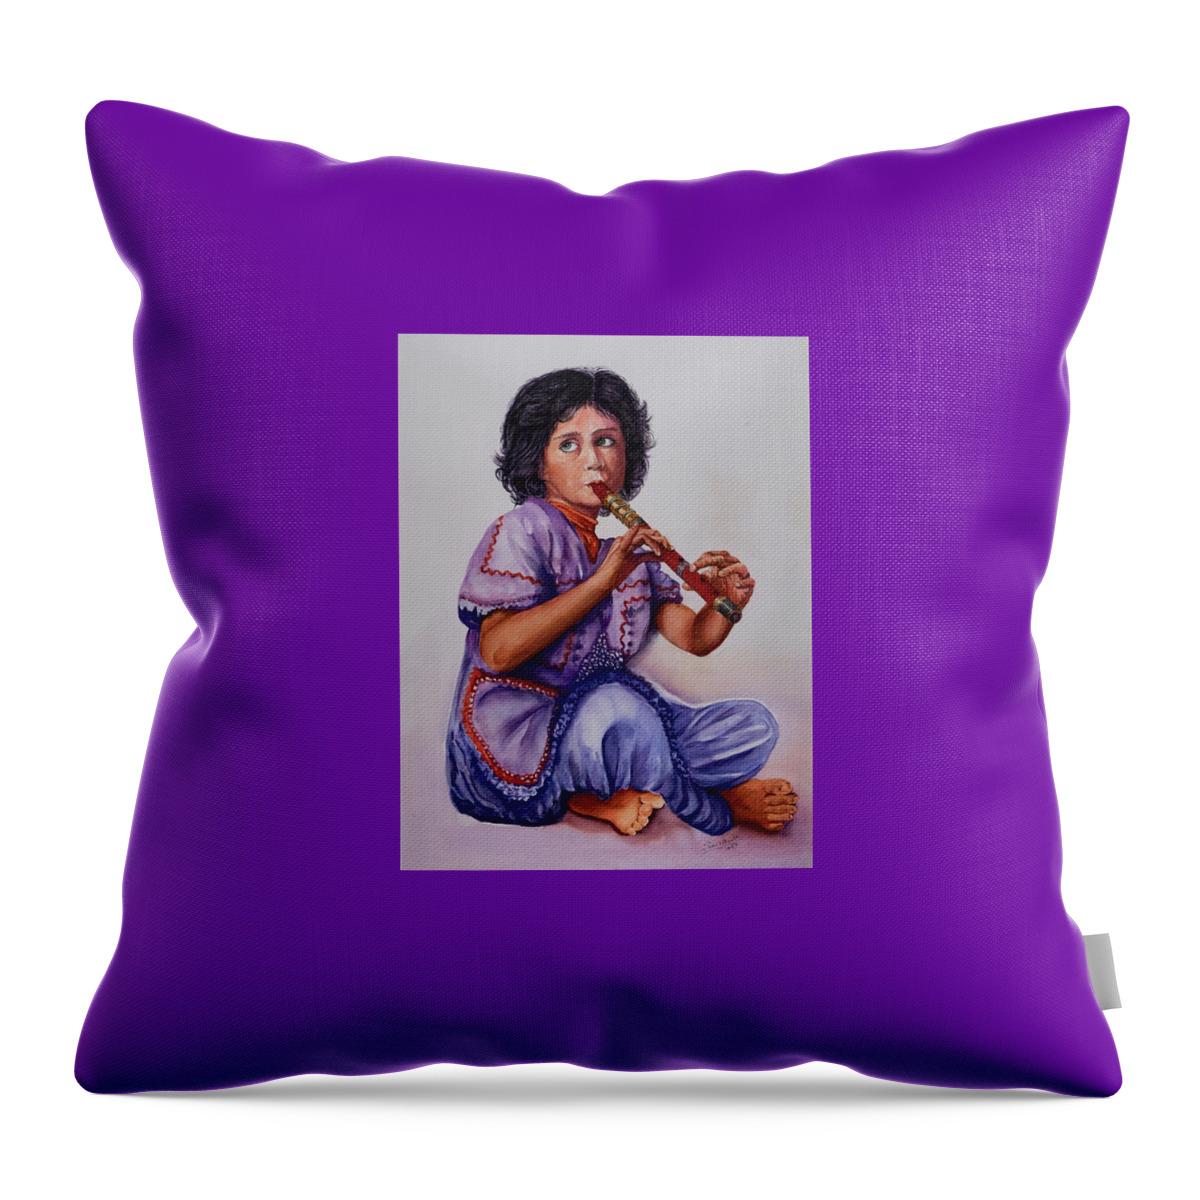 Art - Watercolor Throw Pillow featuring the painting Practice. Watercolor Art by Sher Nasser